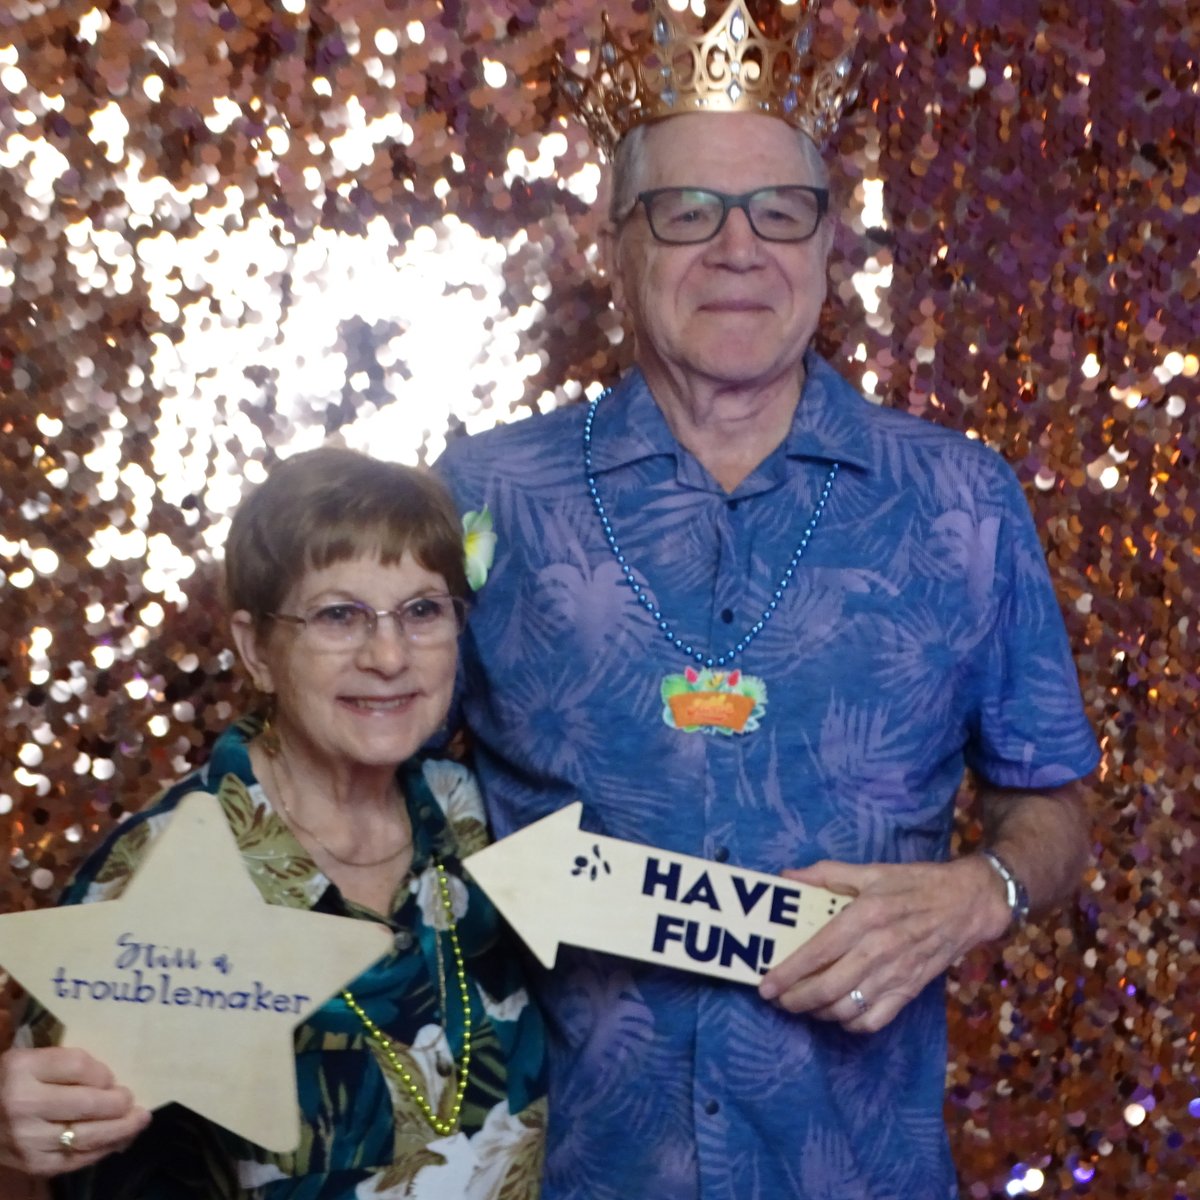 Maya and Scott Brewer found us on @thumbtack to bring our #creativity to Marley’s #BatMitzvah with a  #photobooth #Photography 📷 #unlimited #photostrips #digitalgallery #props #lighting #embededcode at #neptunianwomansclub in #ManhattanBeach #marambucreativity @marambula.com